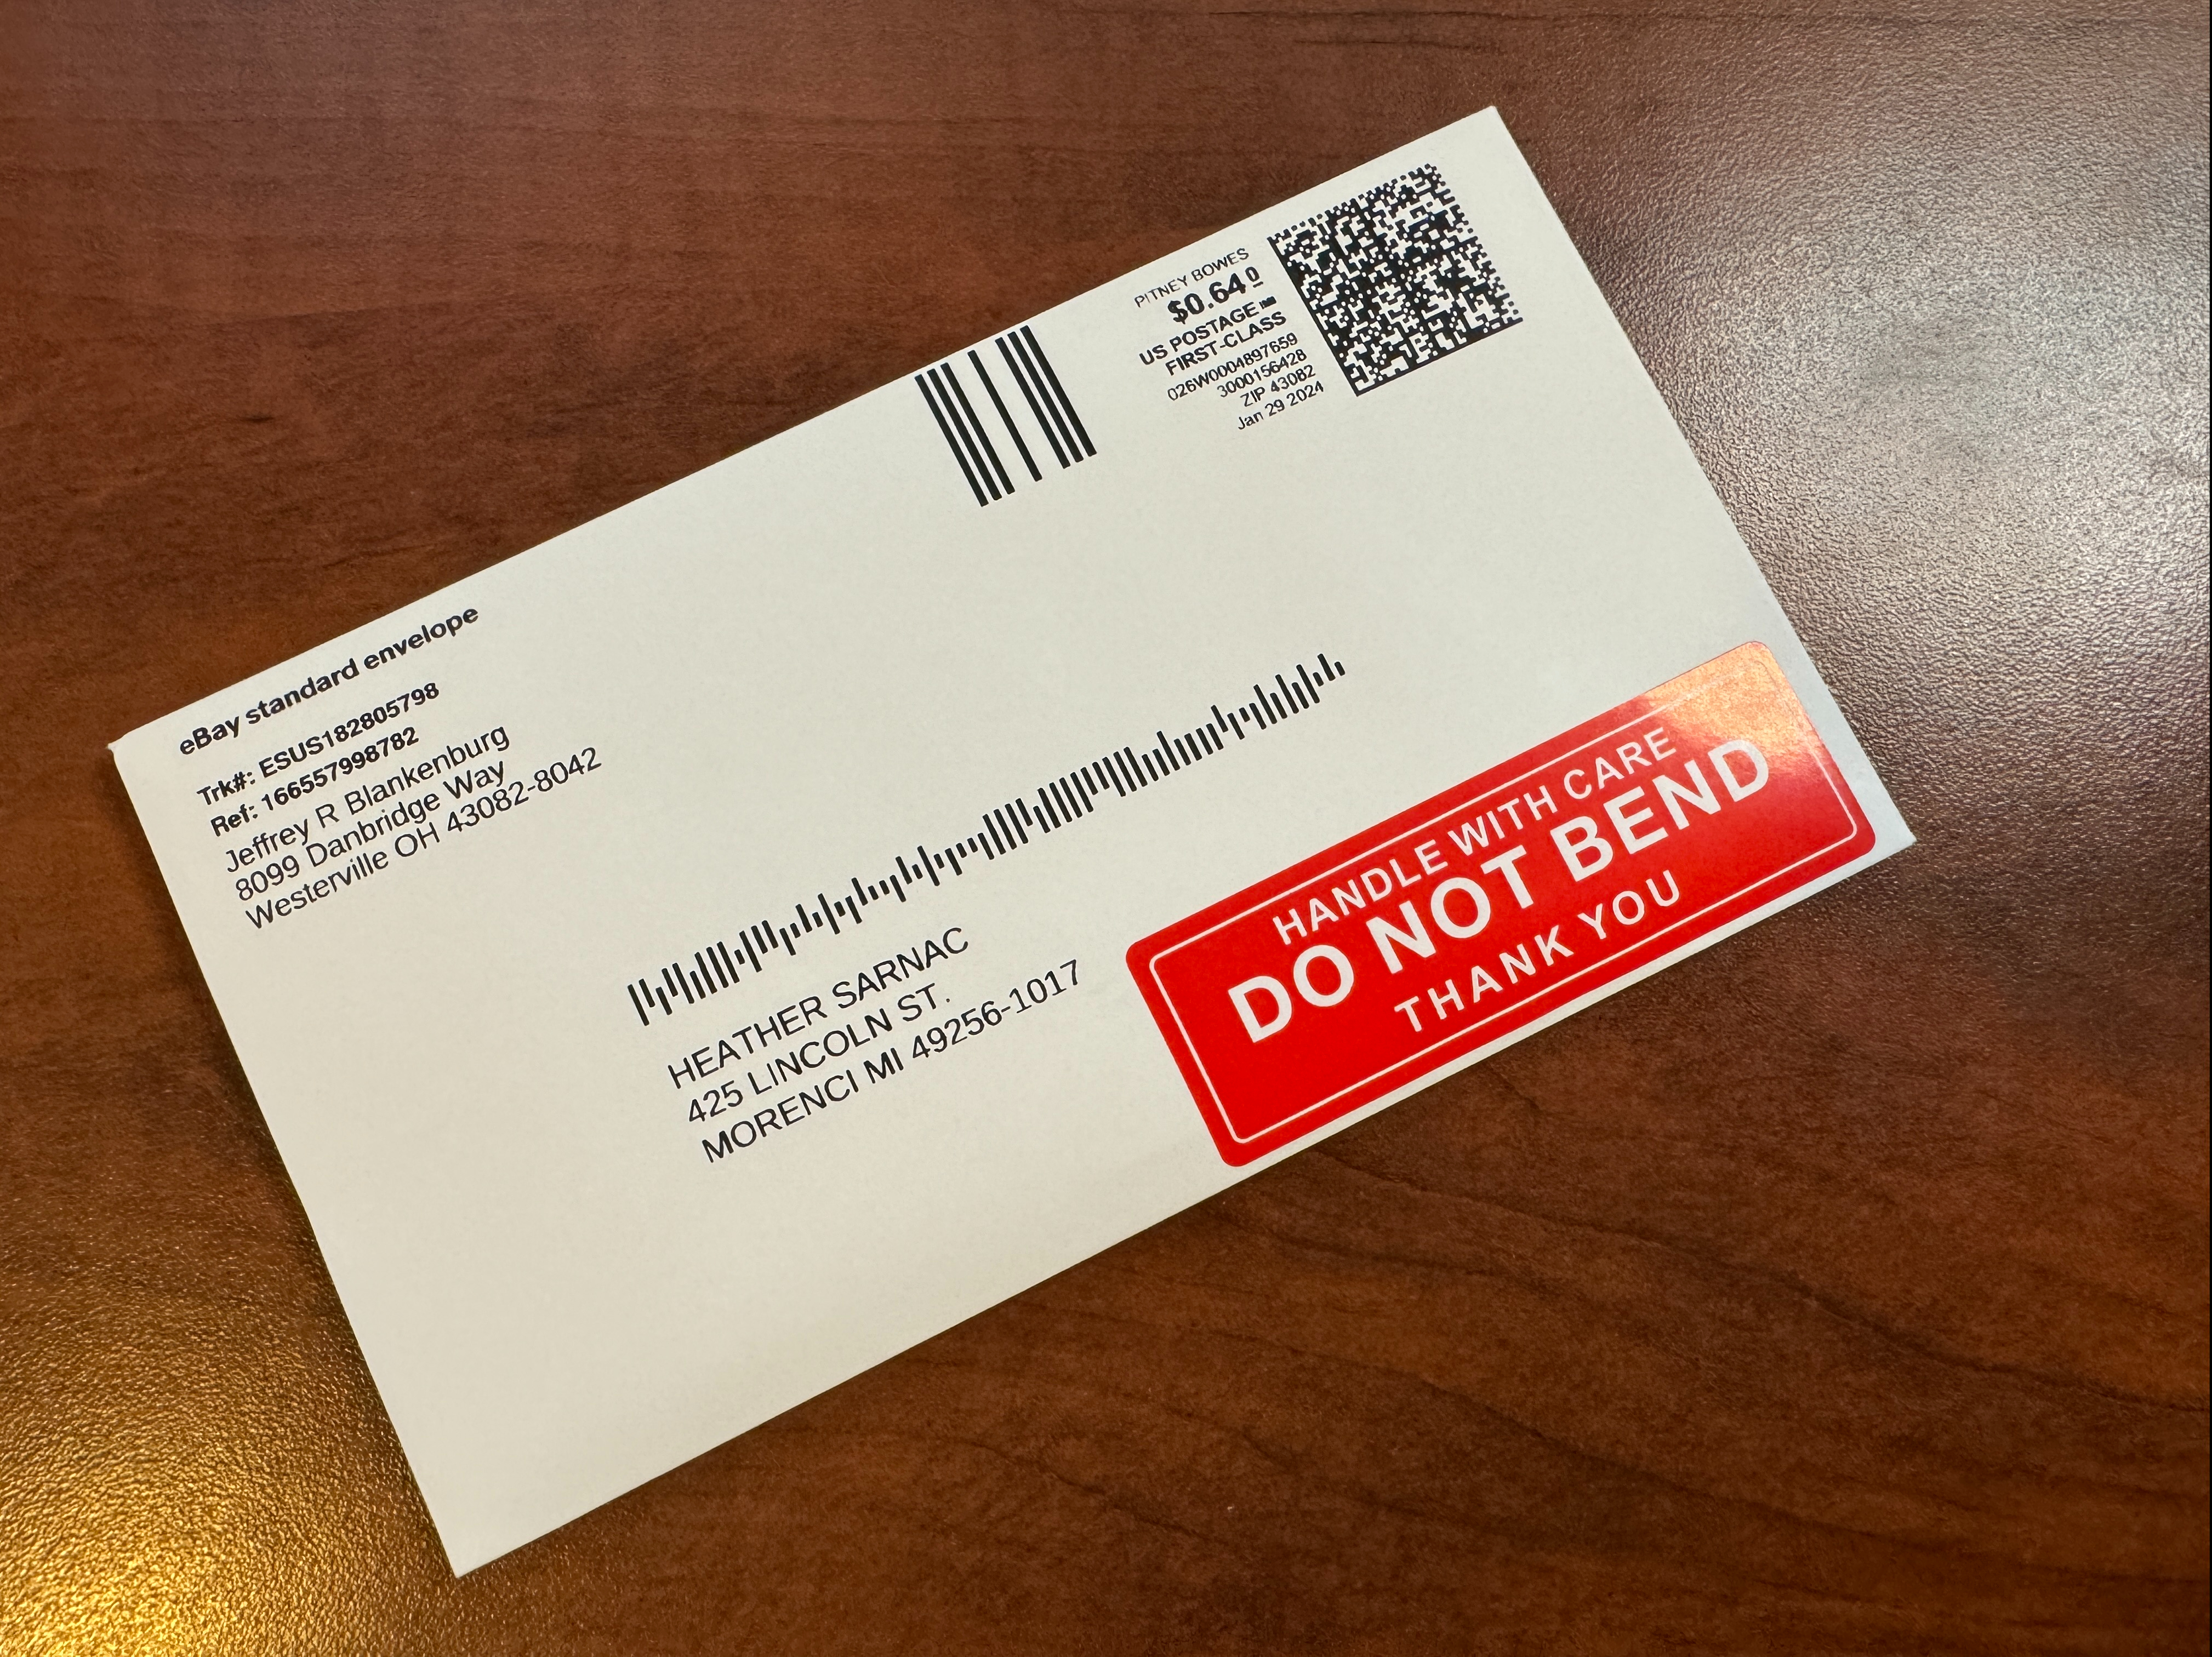 The front of the envelope with a "Do Not Bend" sticker.